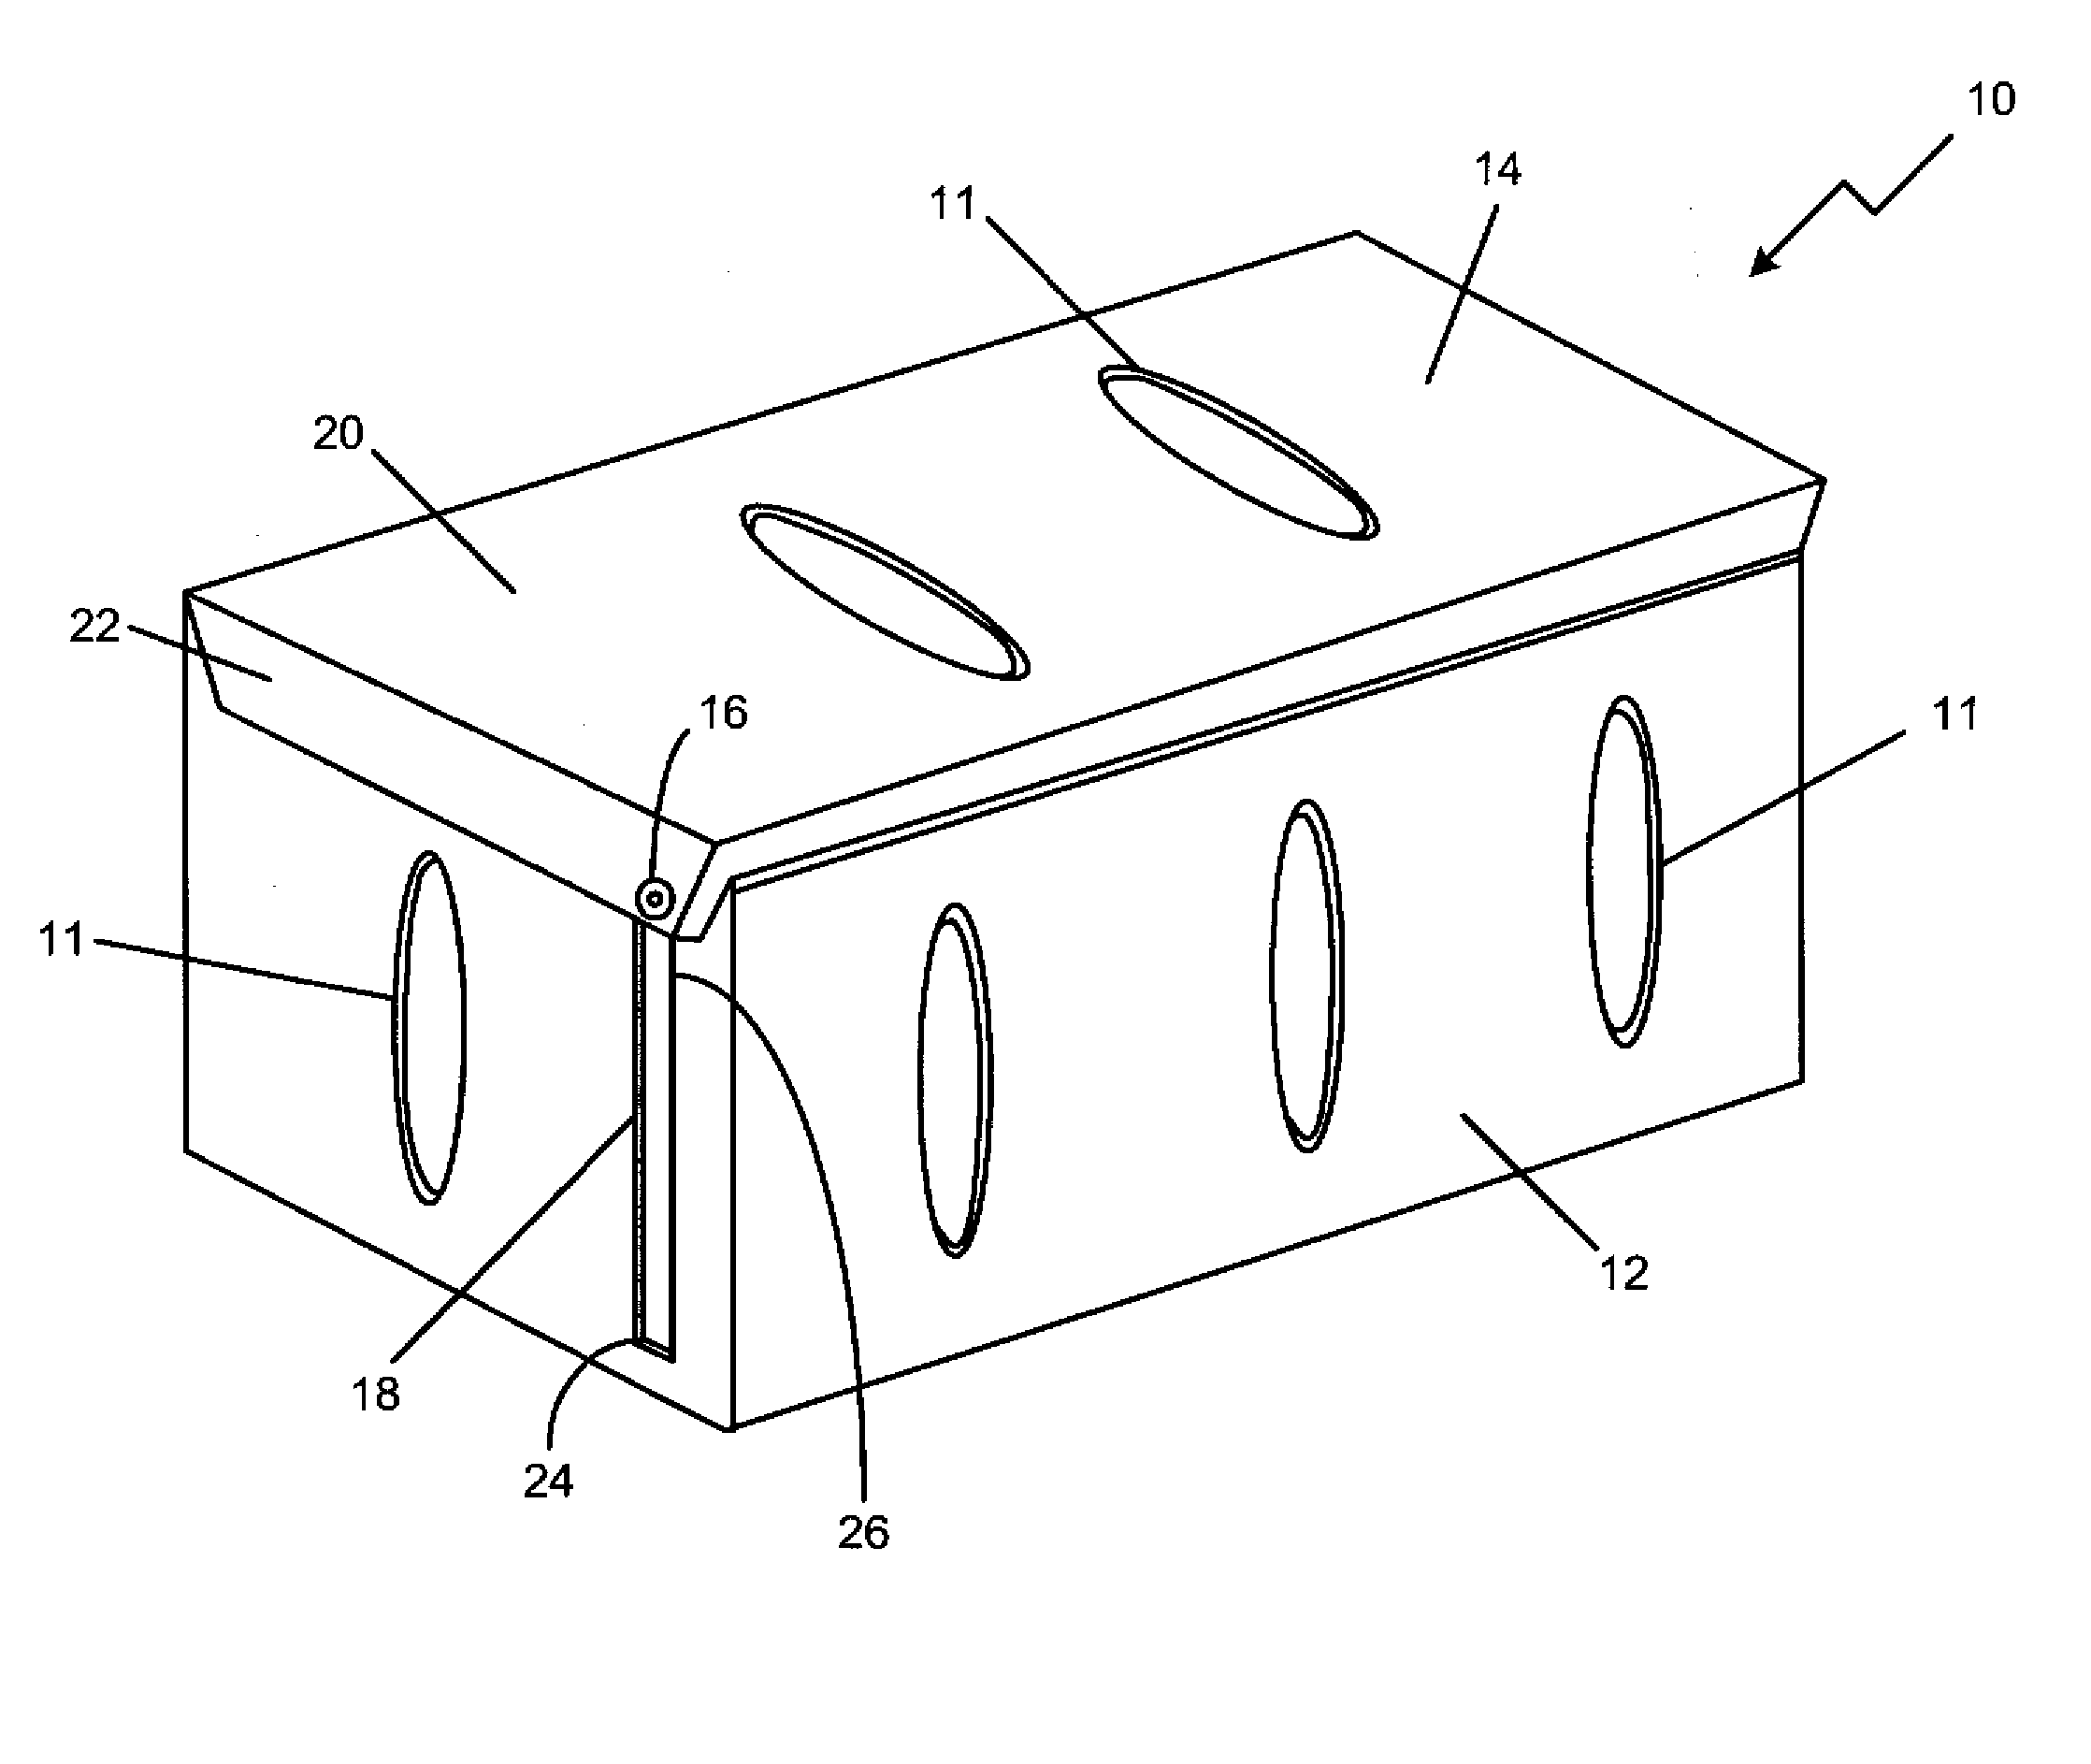 System and Method for Medical Instrument Sterilization Case having a Rotatably Displacing Cover